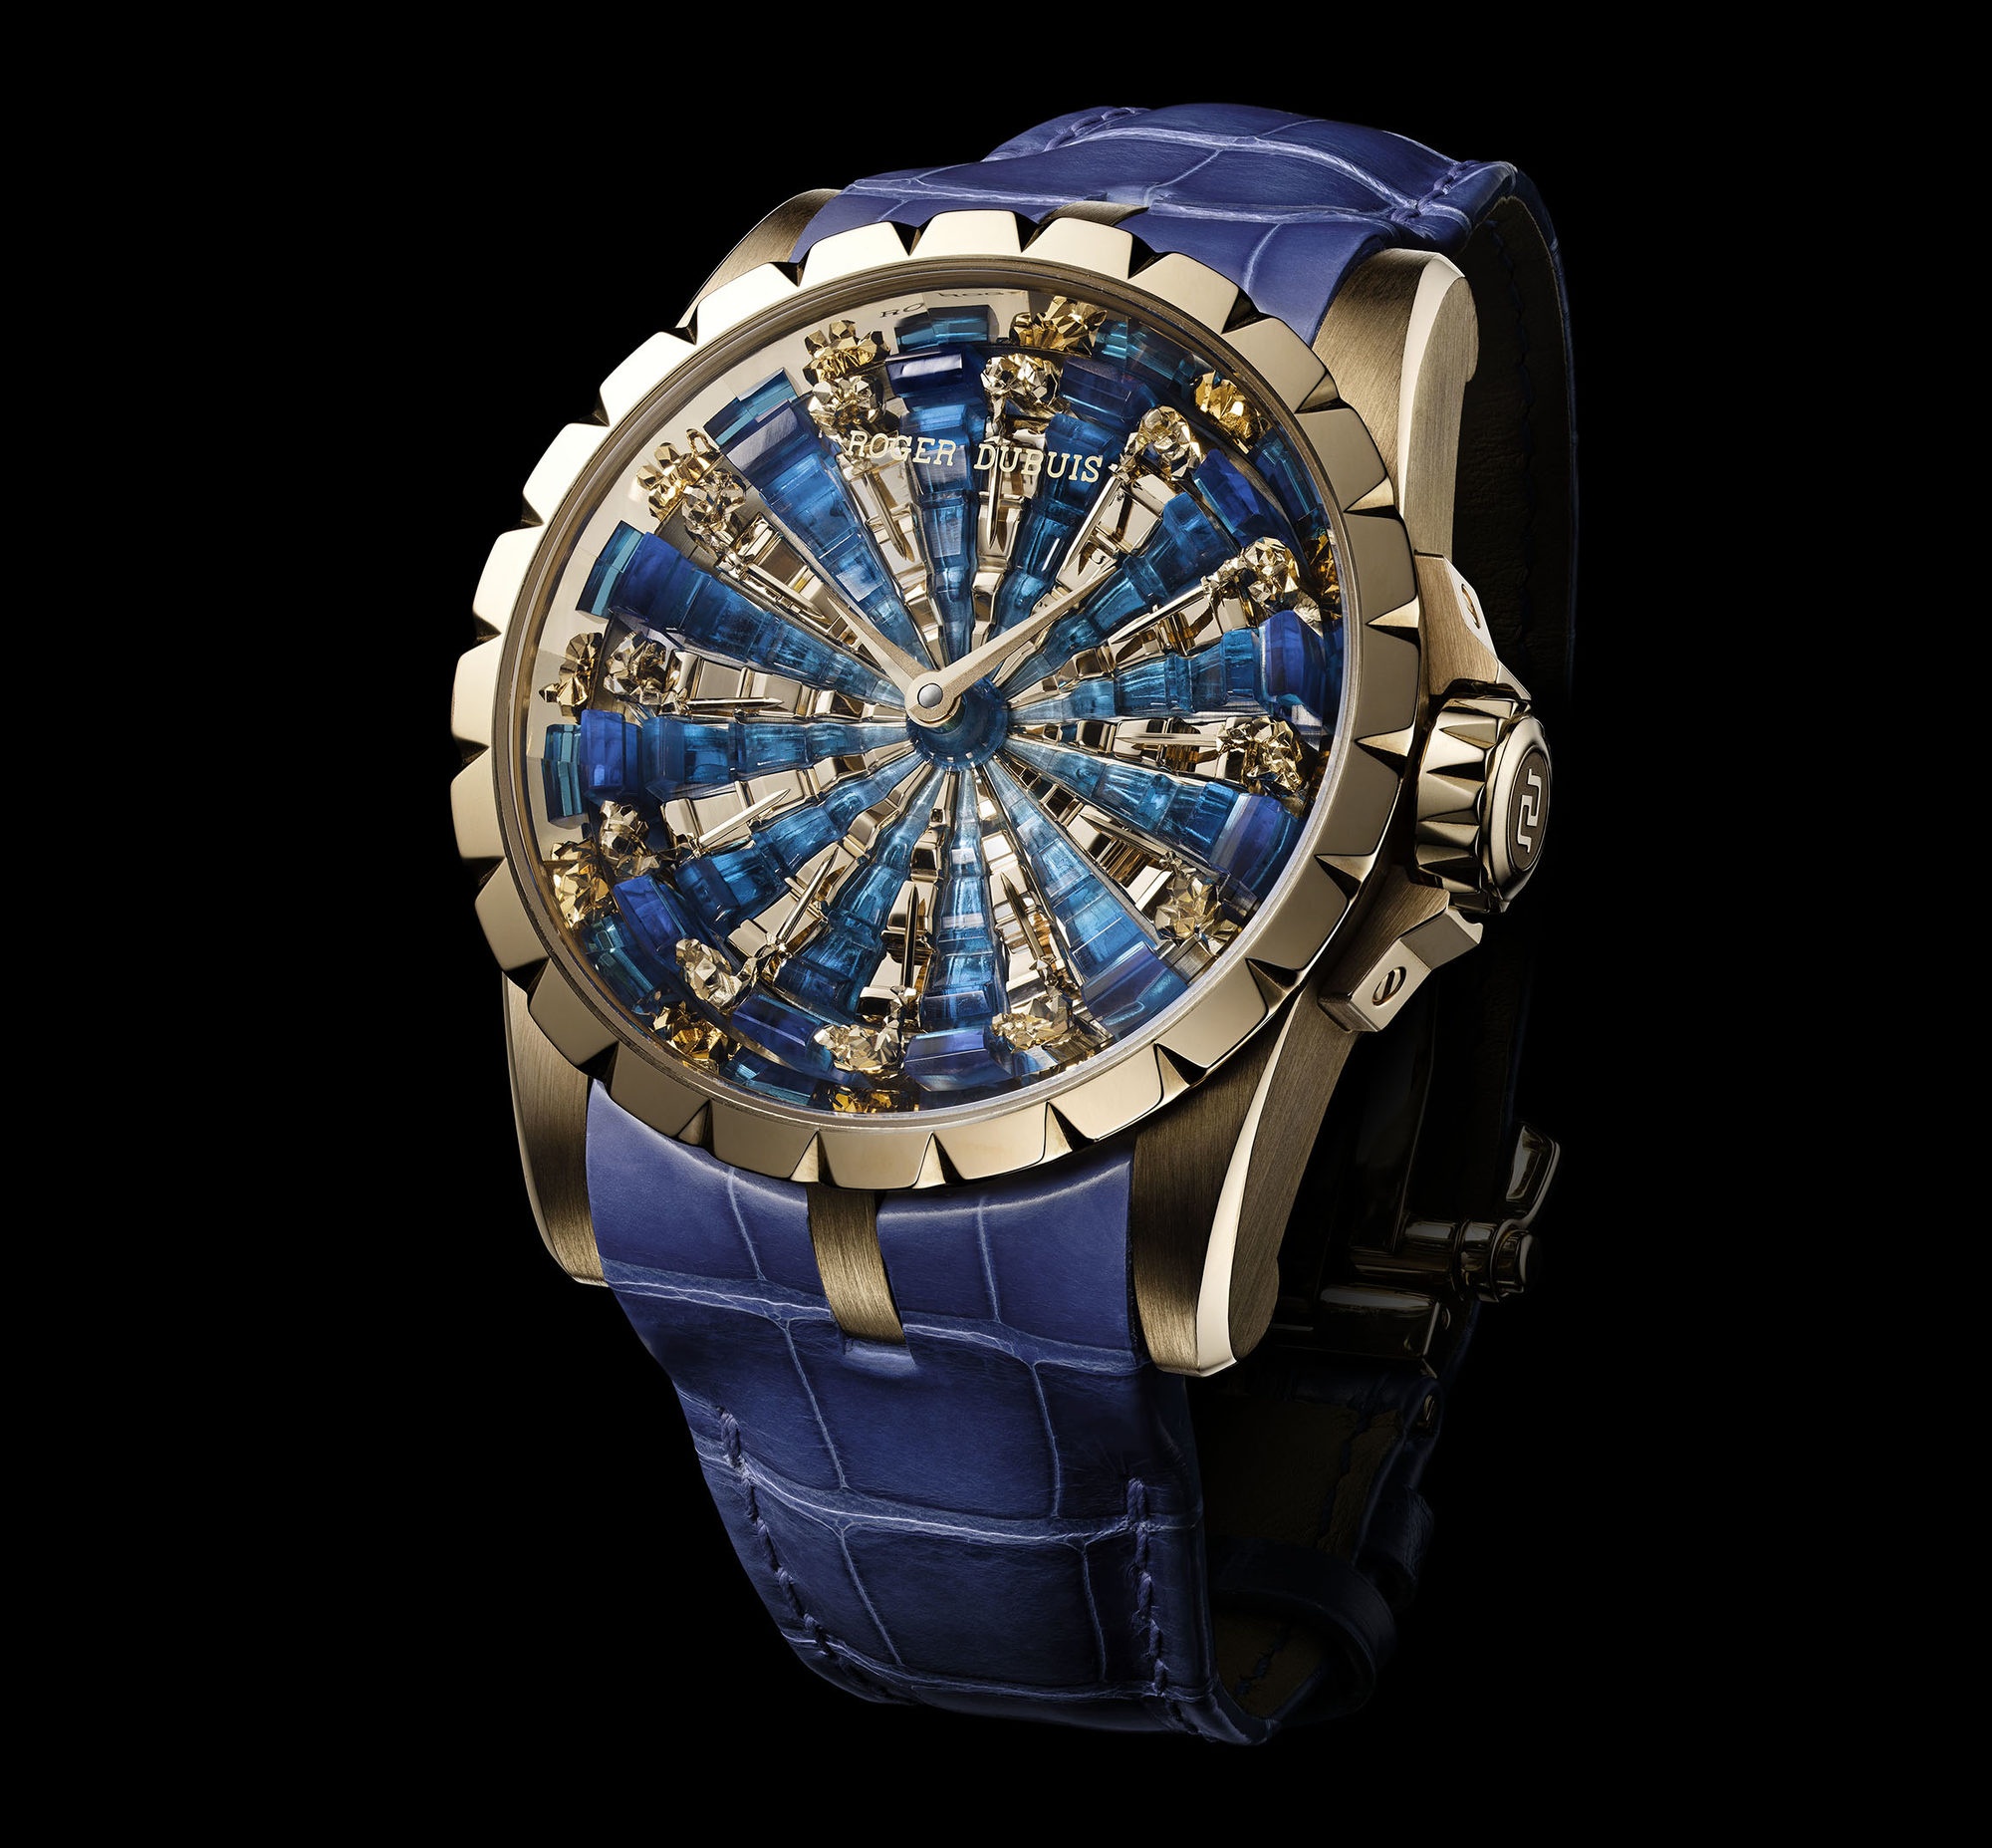 Часы рыцари круглого. Часы Roger Dubuis Excalibur. Часы Roger Dubuis Excalibur Knights of the Round Table. Roger Dubuis 12 рыцарей часы. Часы Roger Dubuis Knights of the Round Table.